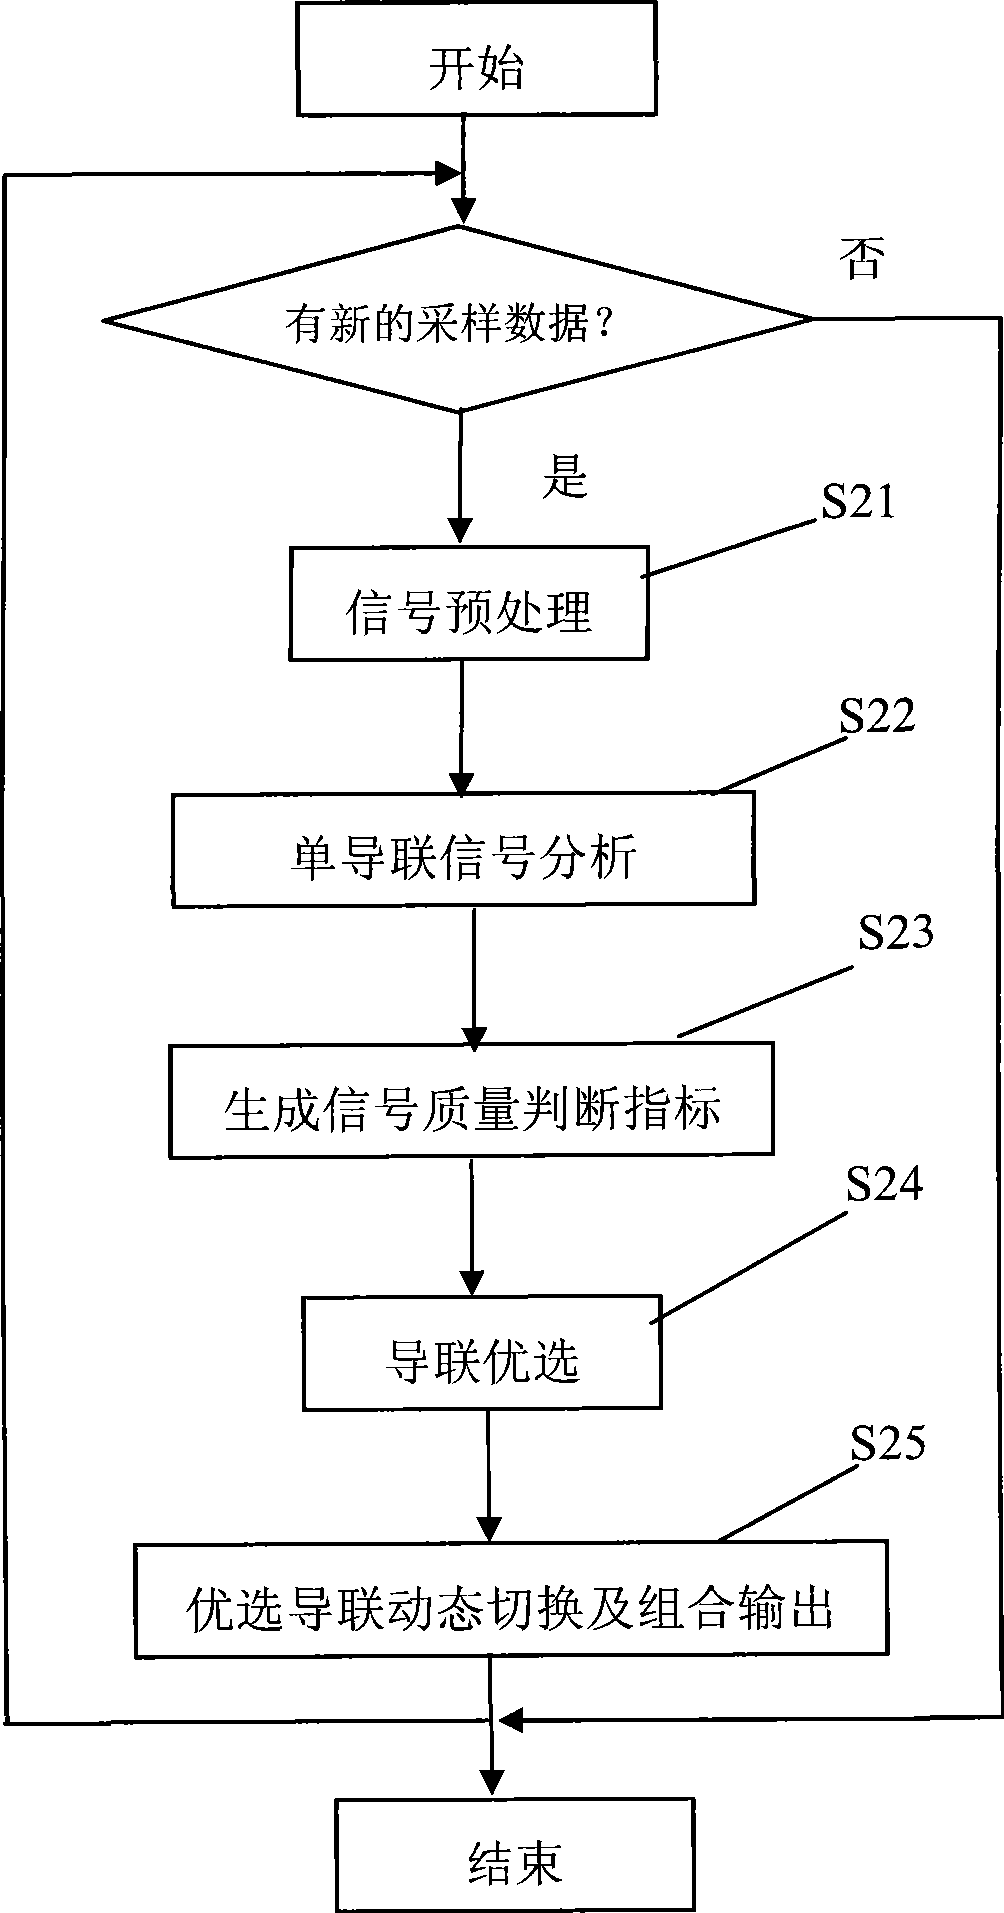 Method and device for processing multi-lead synchronized electrocardiosignal